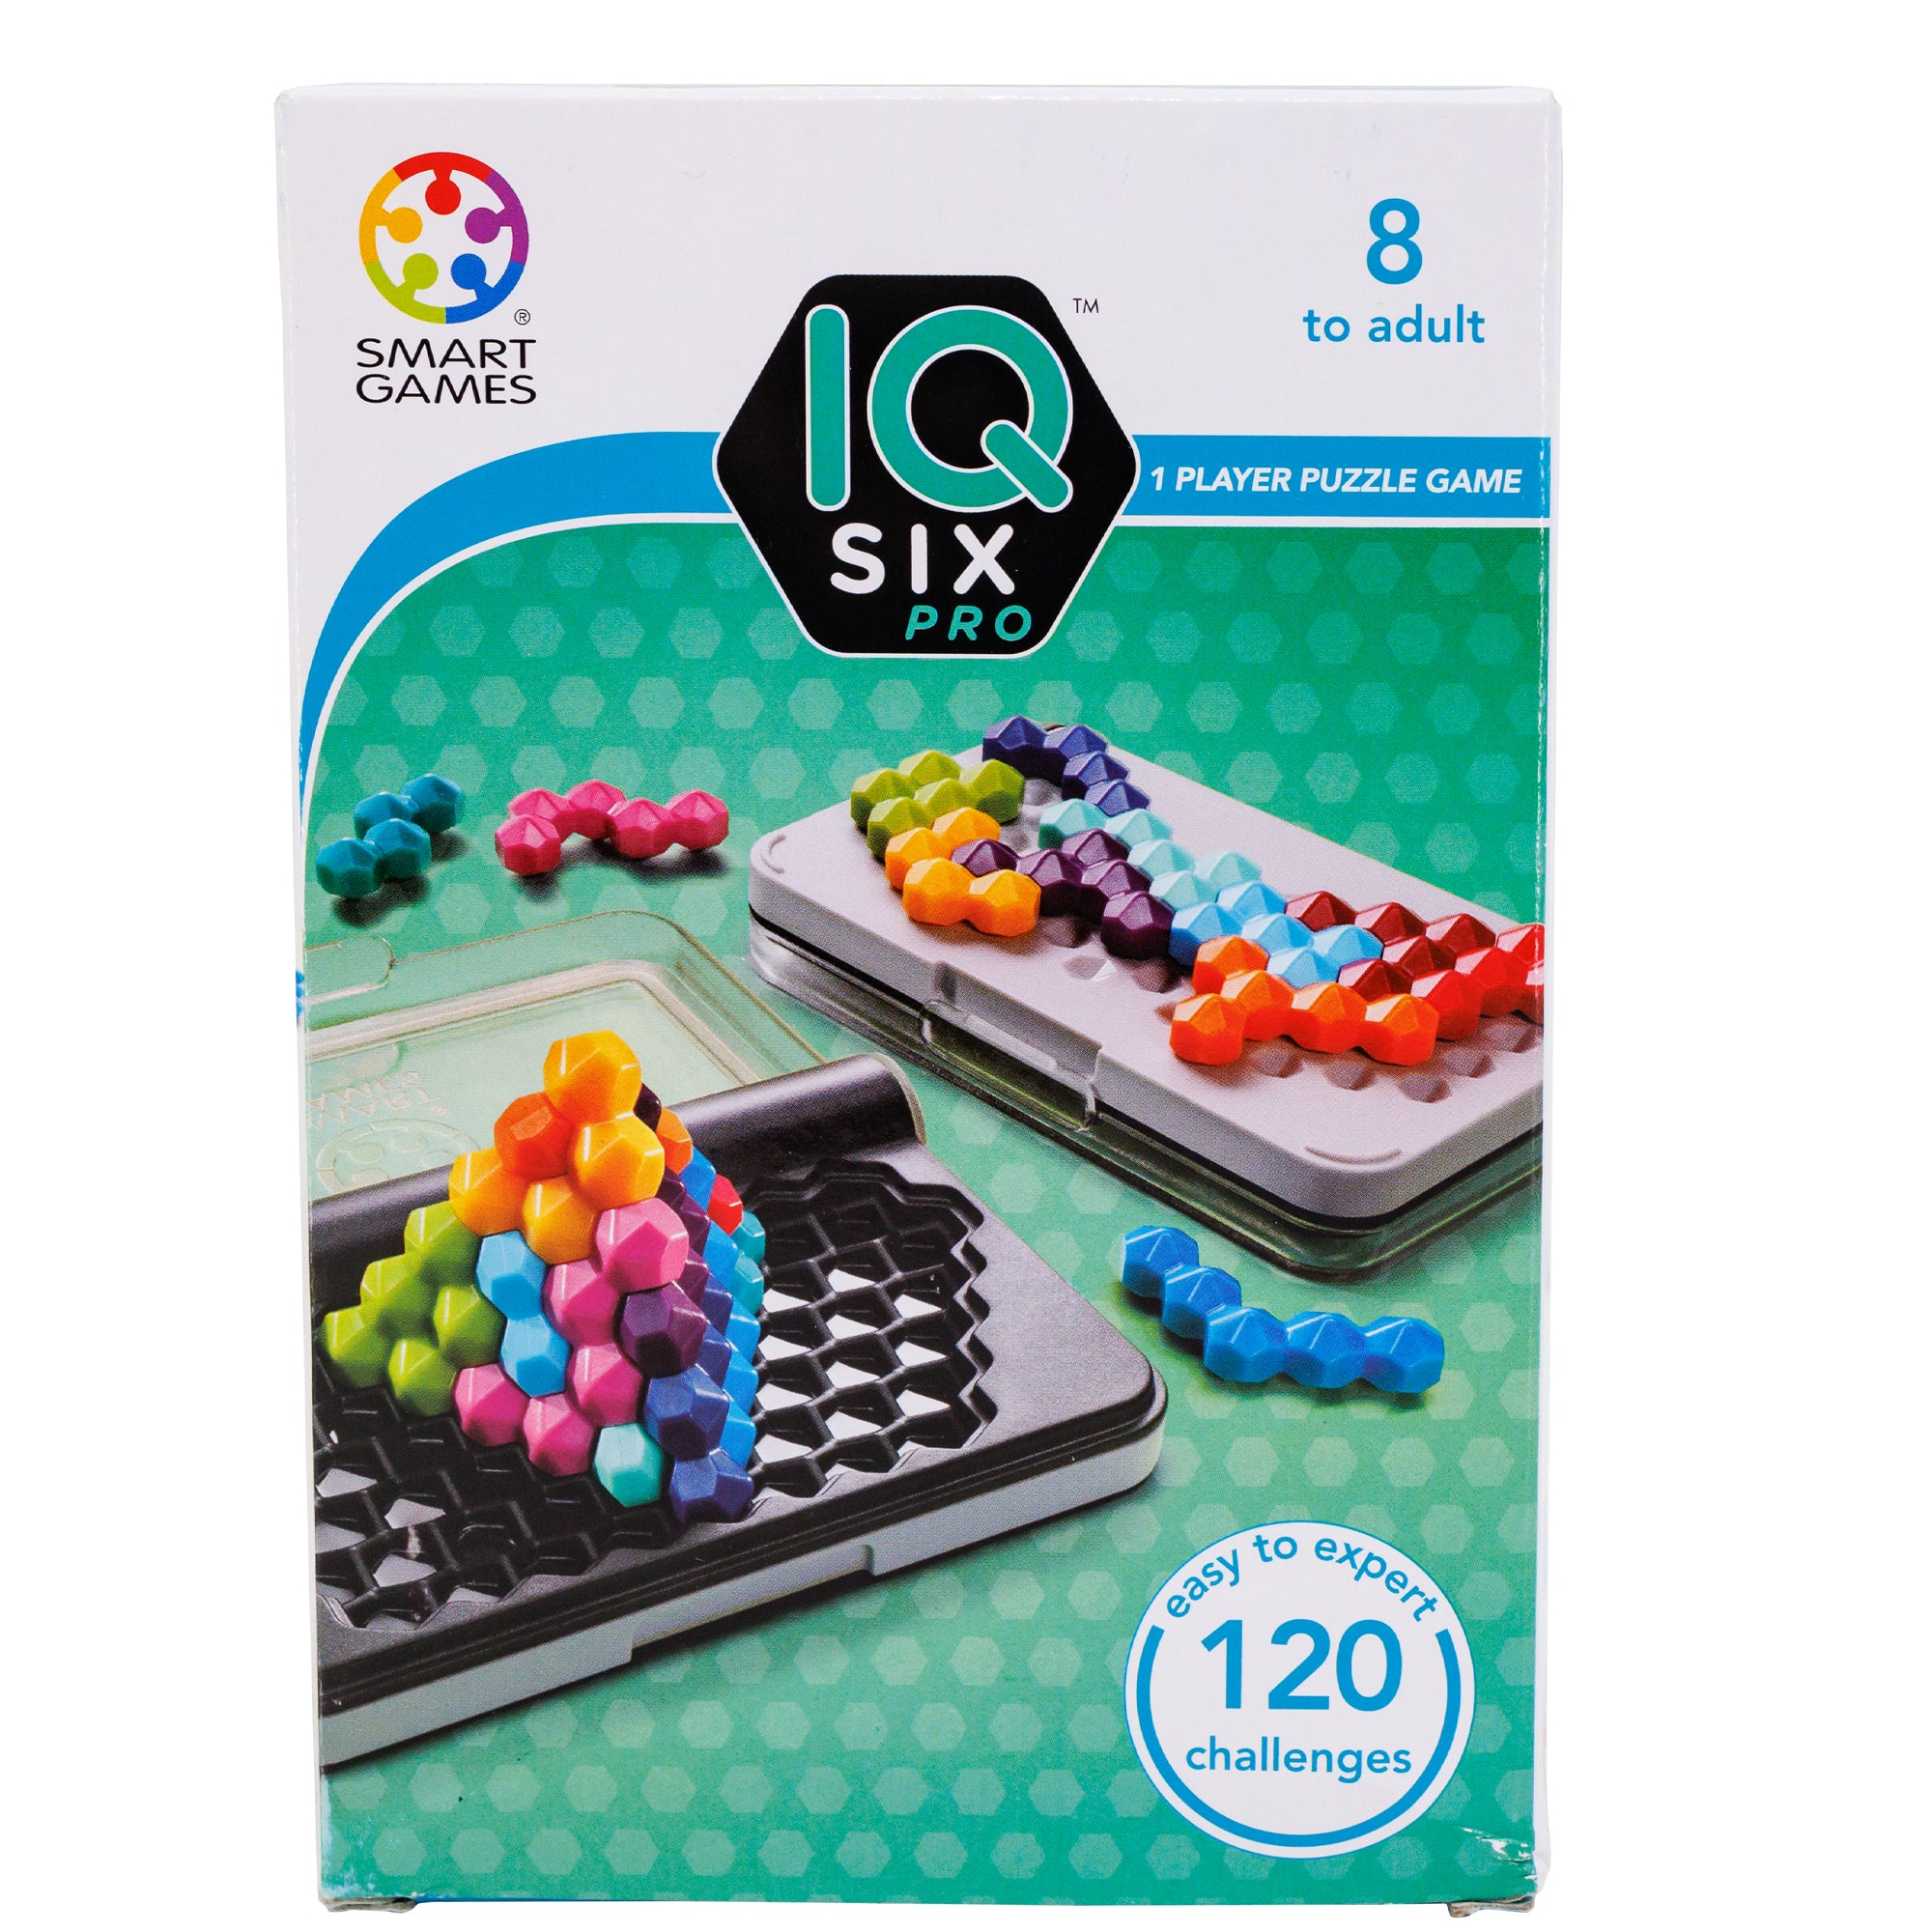 The I Q Six Pro game box. The background is white at the top and green with hexagon shapes covering most of the bottom. The is a photo of the game in play, showing the different ways to play. The hinged game is open to show a hexagon grid on black plastic with a clear lid and pieces stacked into a pyramid on top. The same game board in the back has pieces laid flat in the grid on the back of the board, which is a gray color. There are a few pieces off to the side. The pieces are Tetris style hexagon shape.